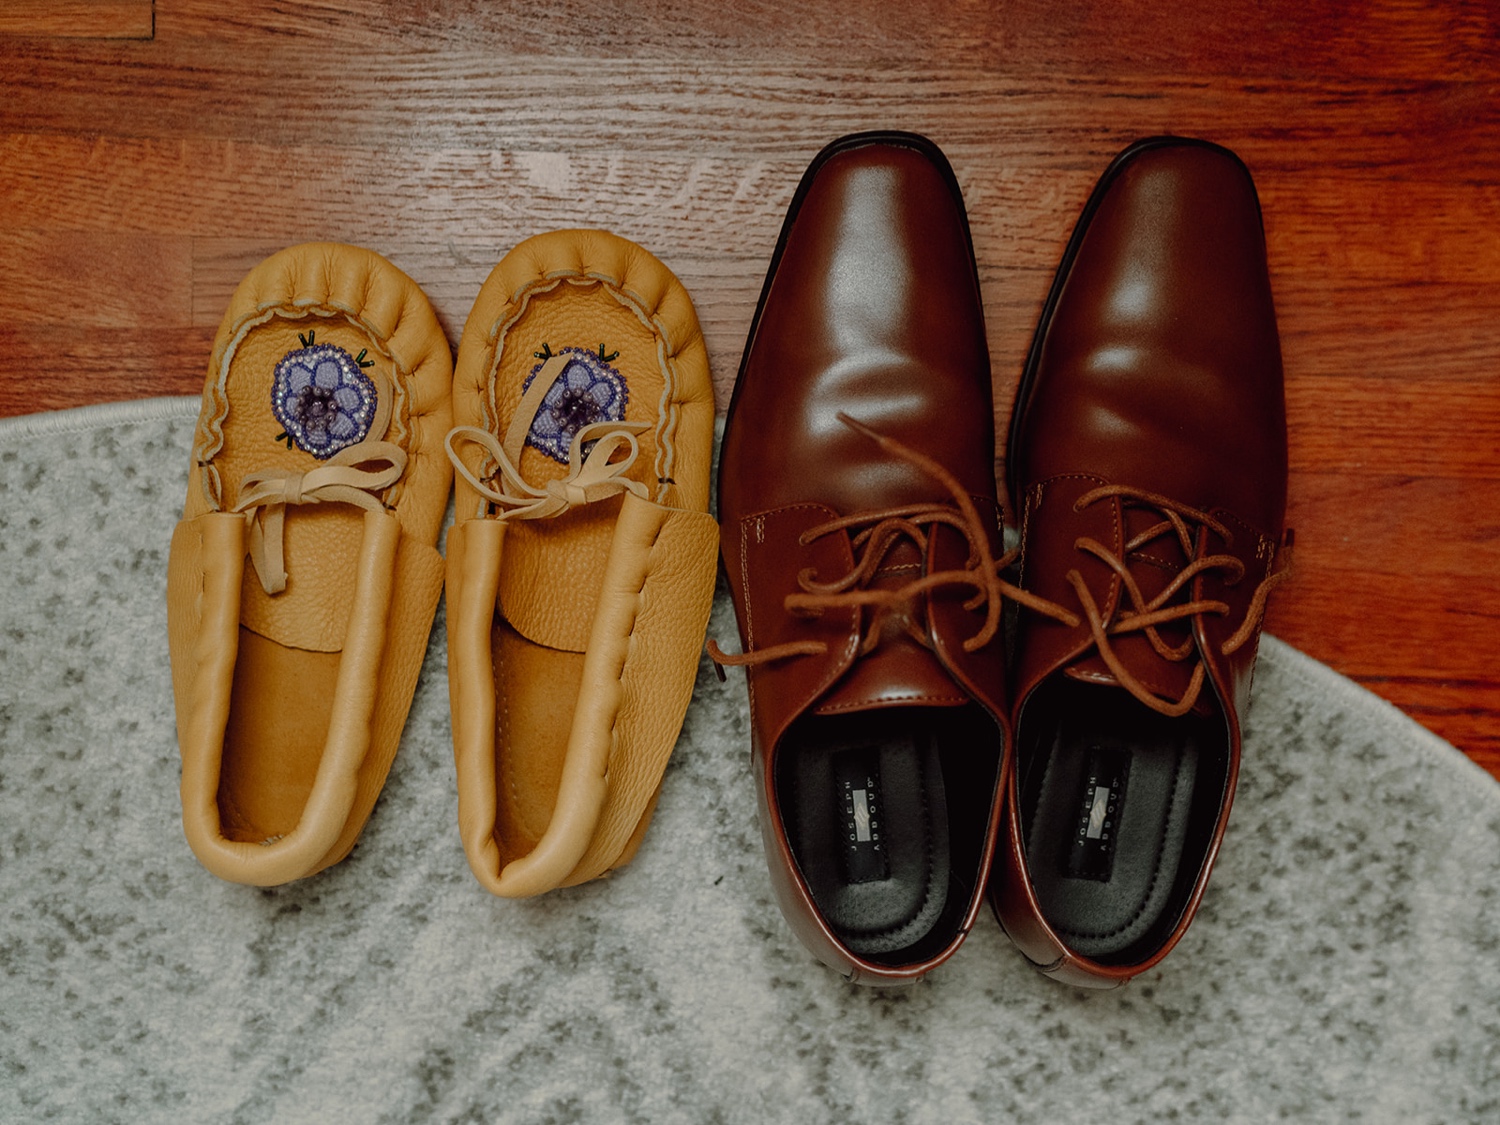 Couple getting ready for their elopement together at their home in Minneapolis, Minnesota. Bride and Groom’s shoes on the floor. Bride wearing moccasins.